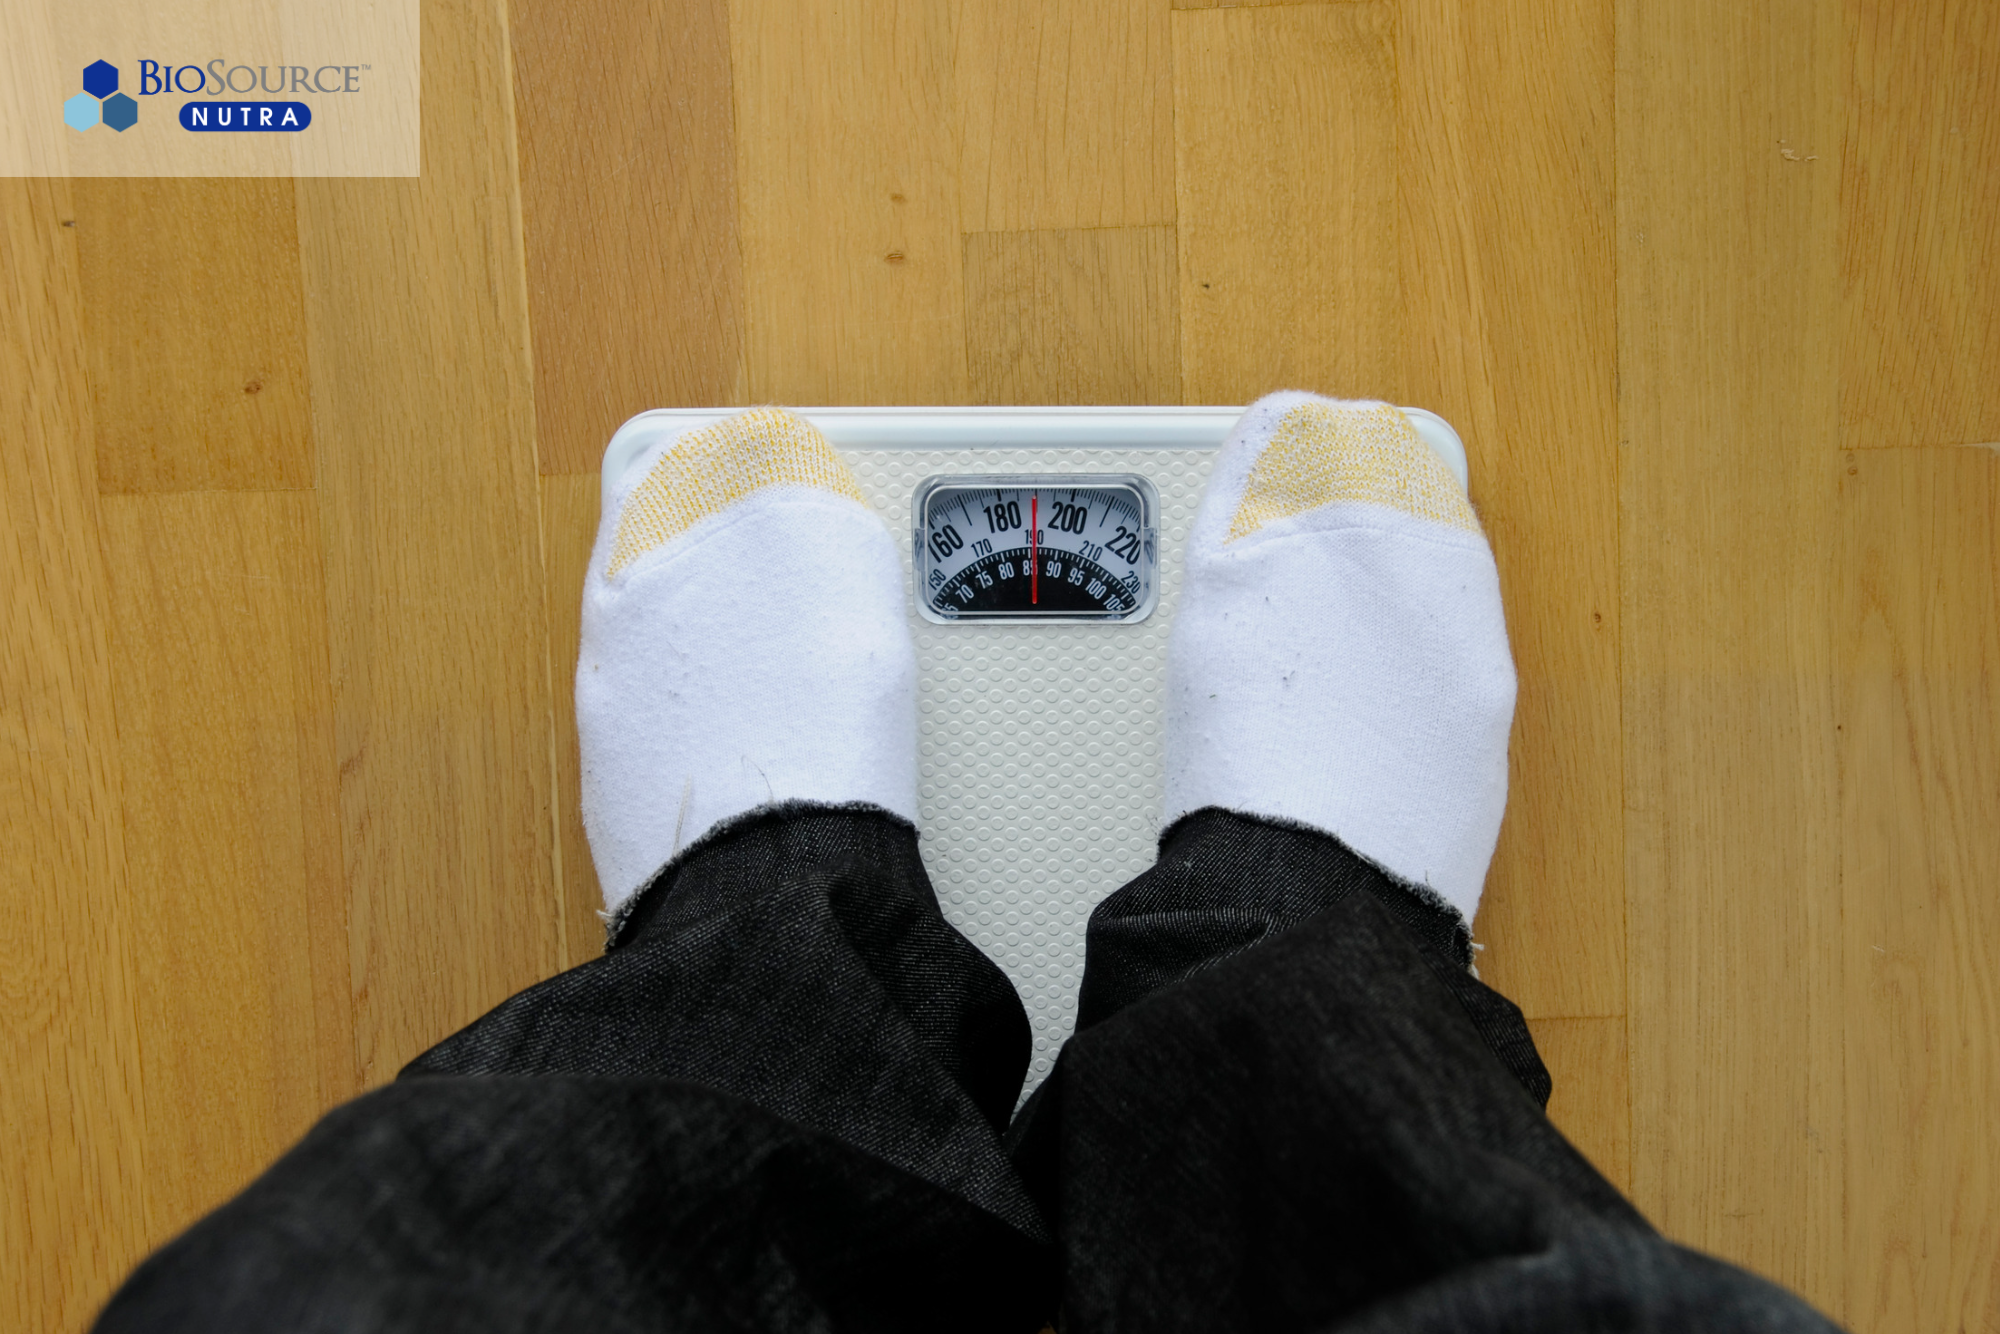 A person is standing on a bathroom scale